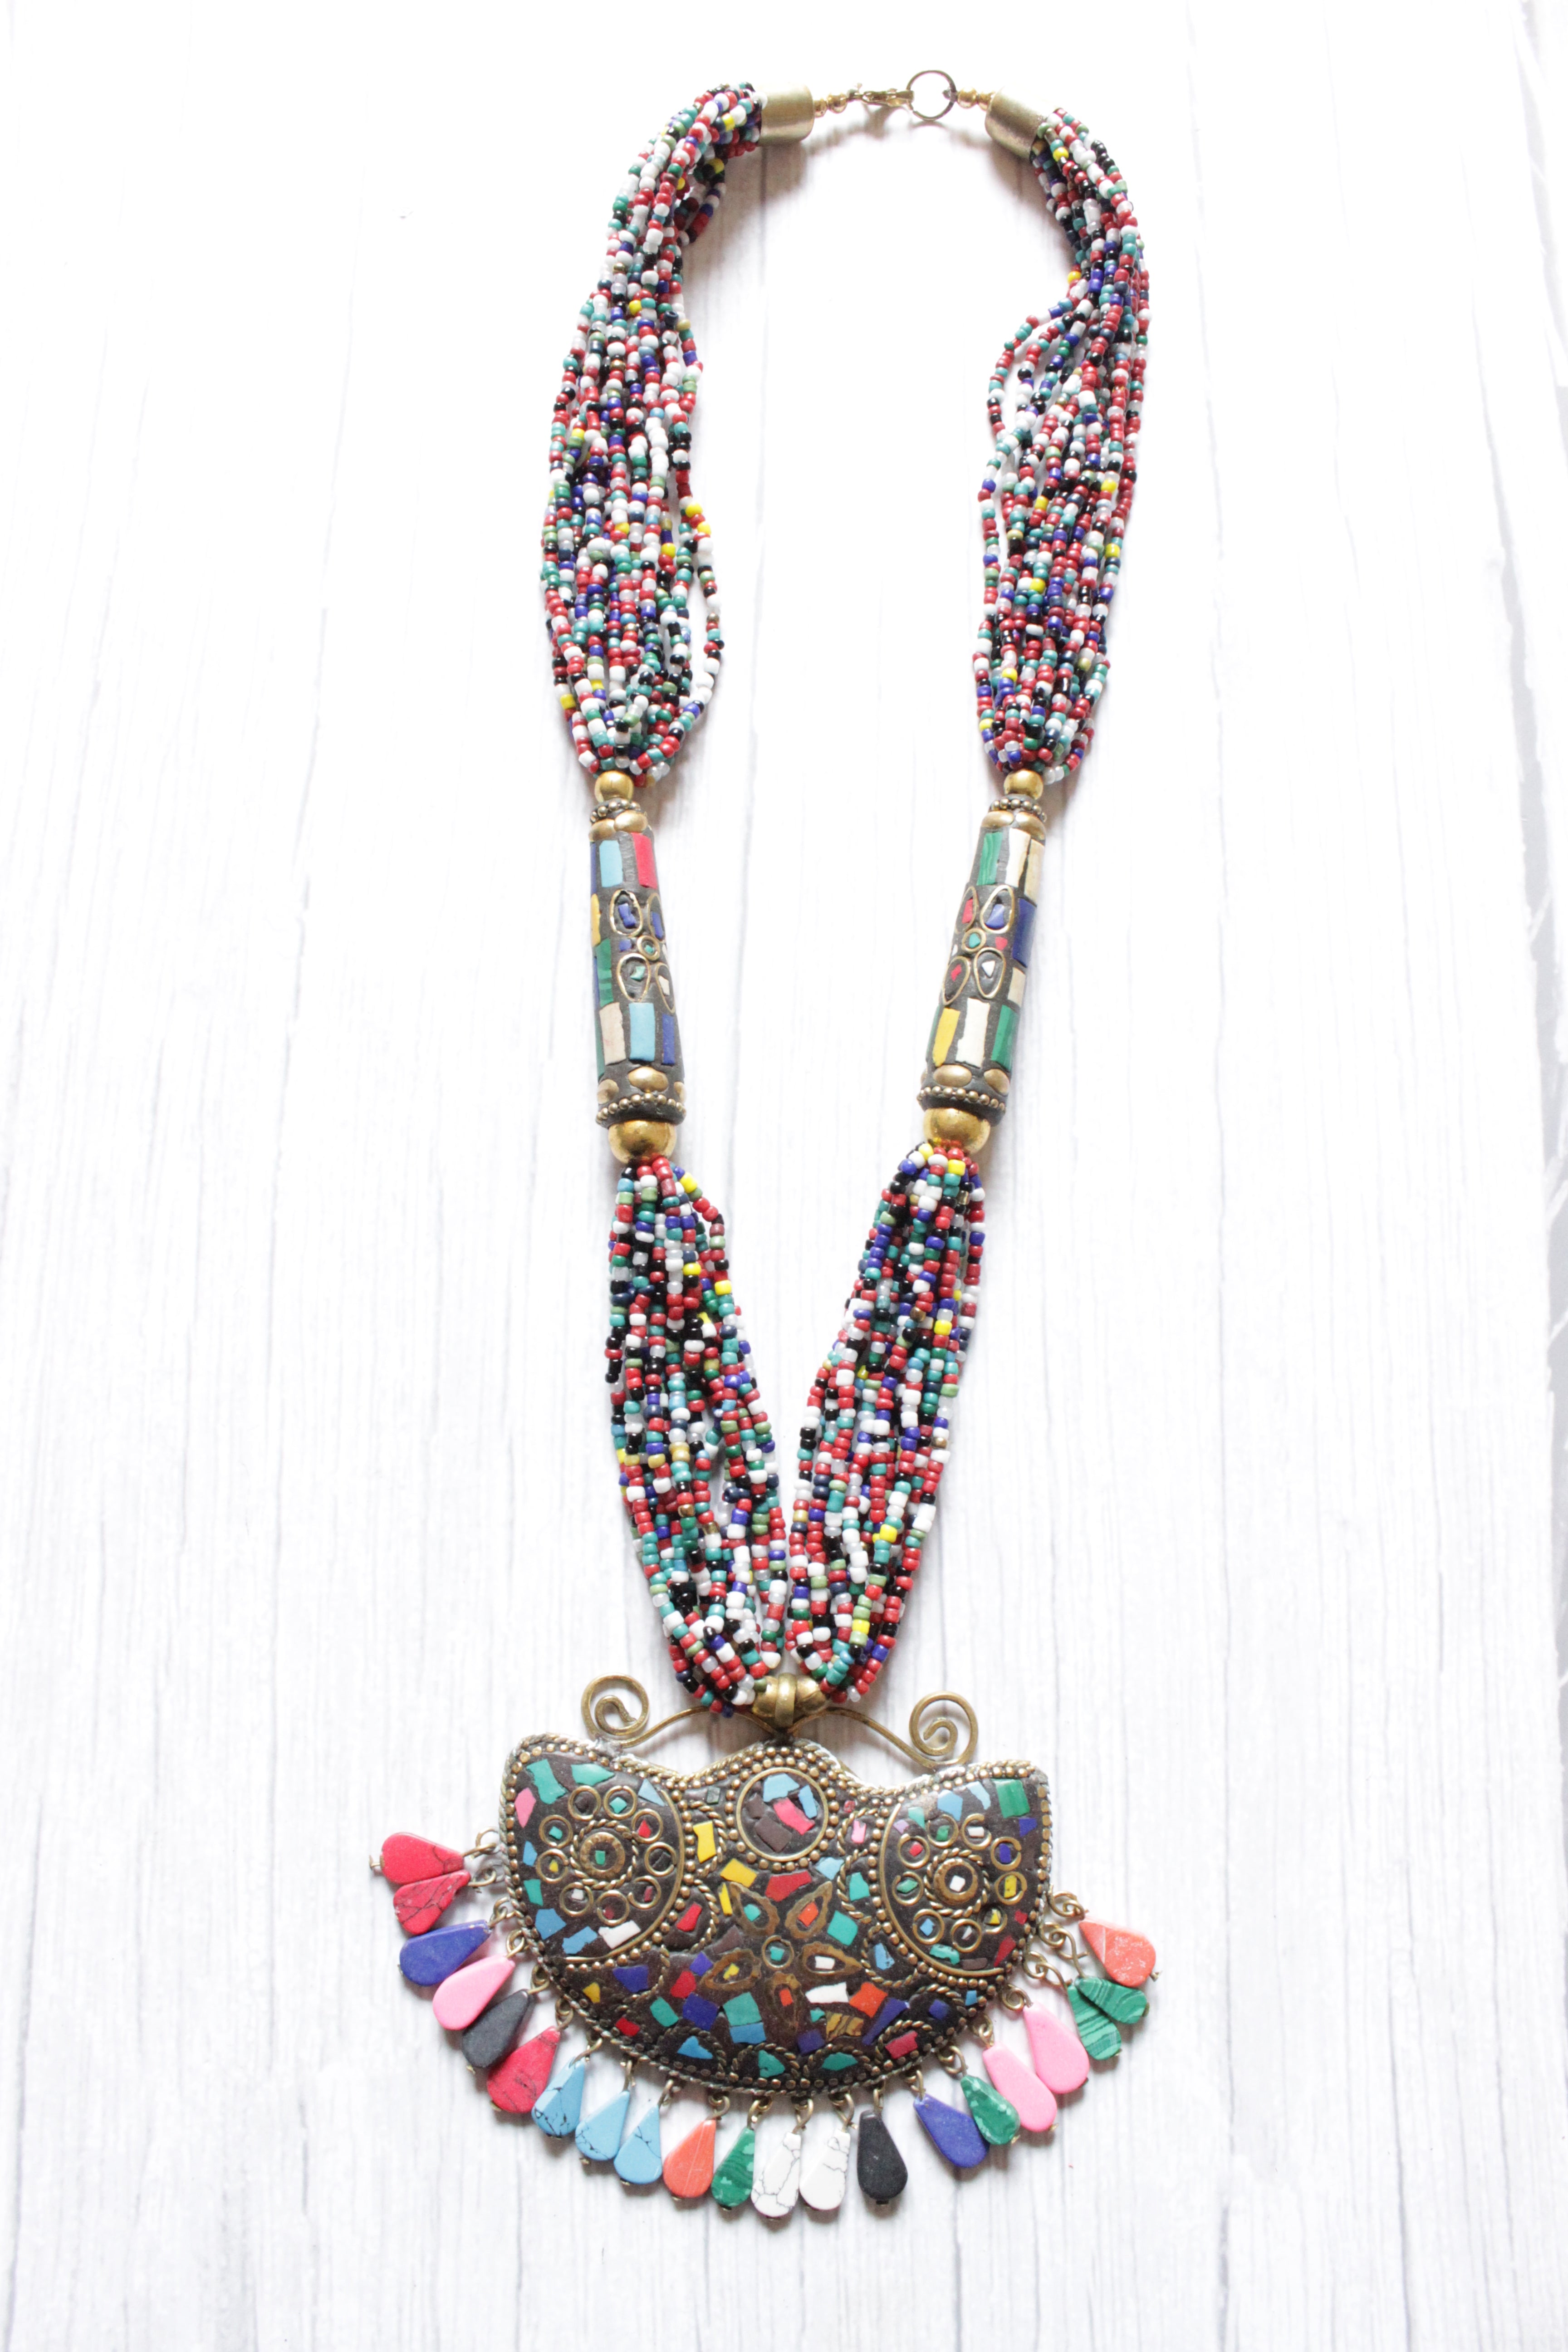 Multi-Color Beads Handcrafted Long Tibetan Necklace